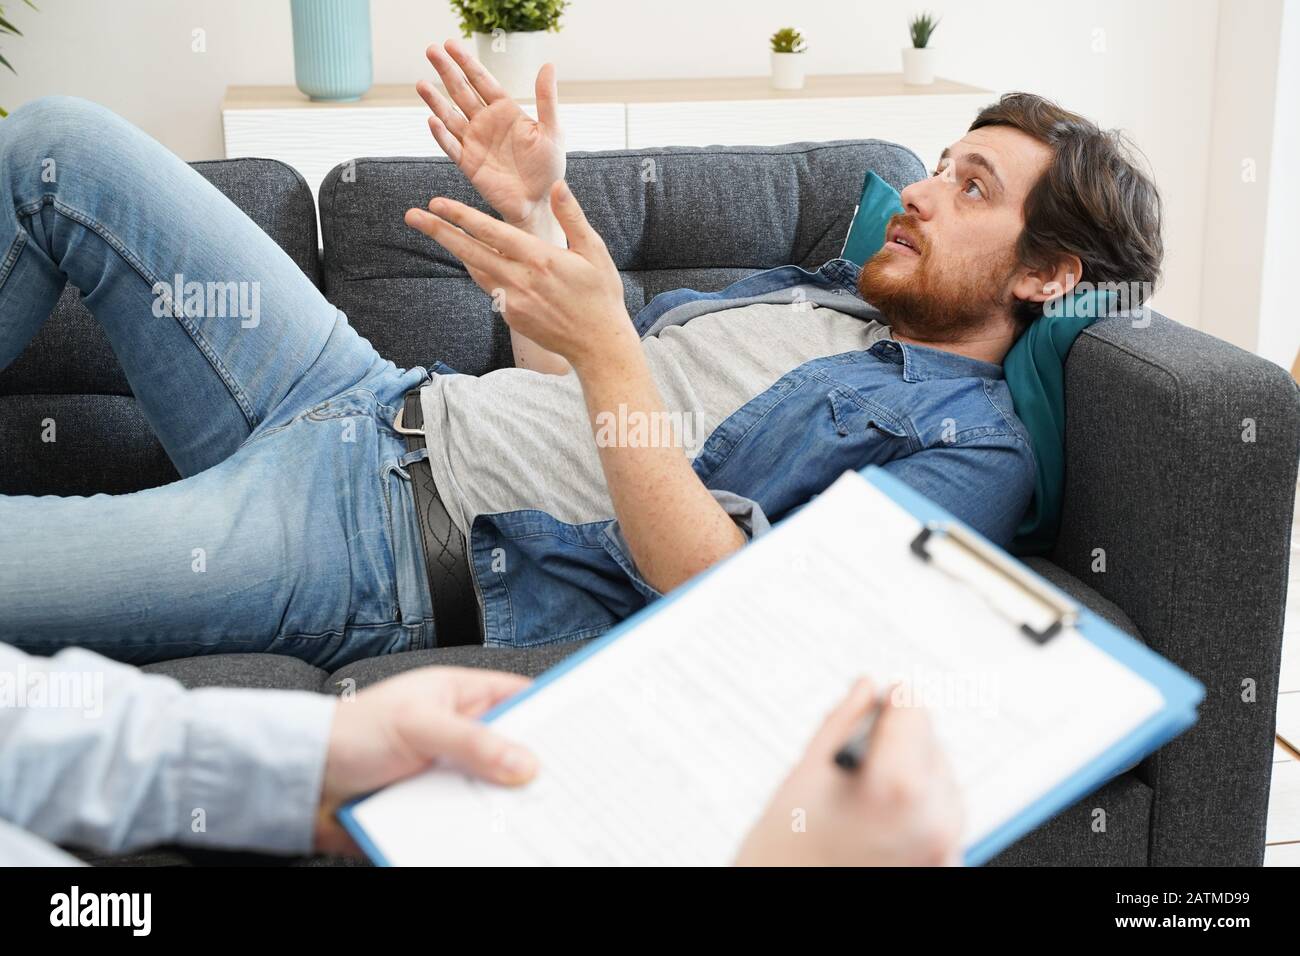 Psychologist doctor taking notes during psychotherapy session Stock Photo